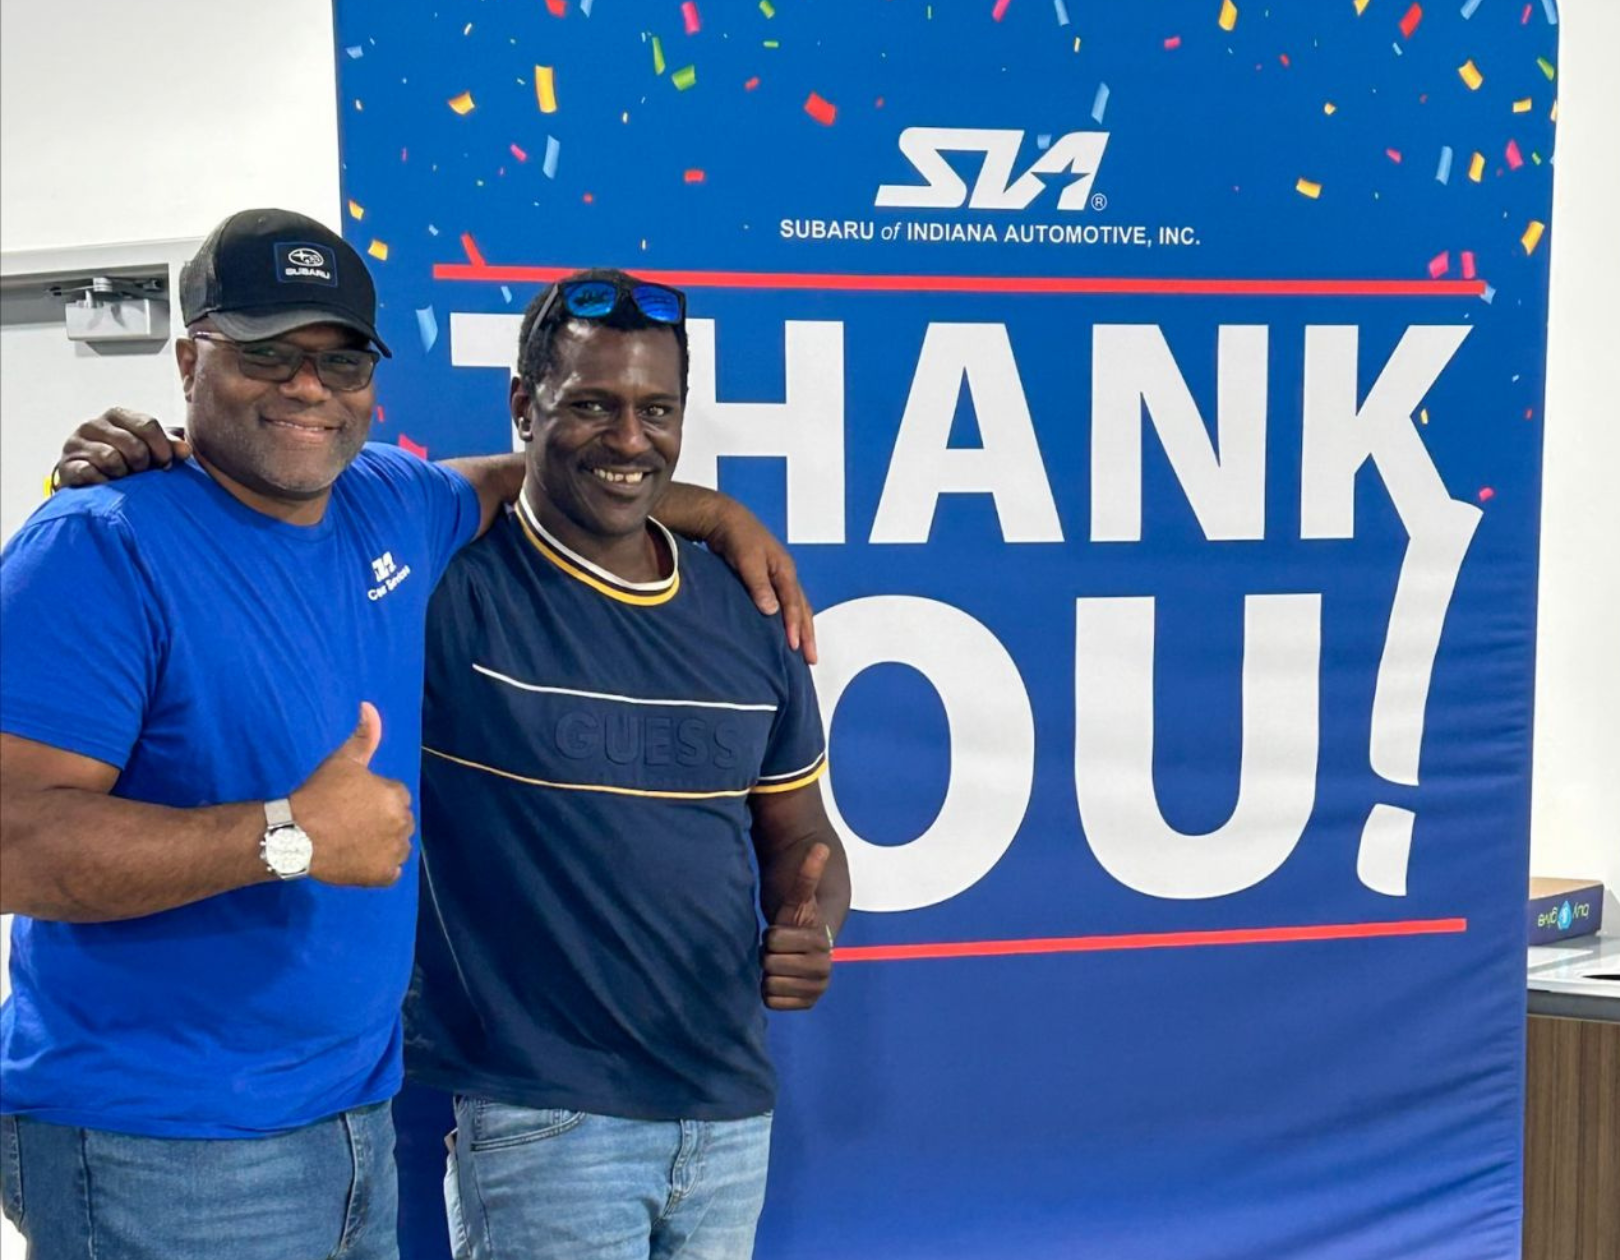 two people giving a thumbs up gesture in front of a Subaru of Indiana Automotive sign that reads thank you